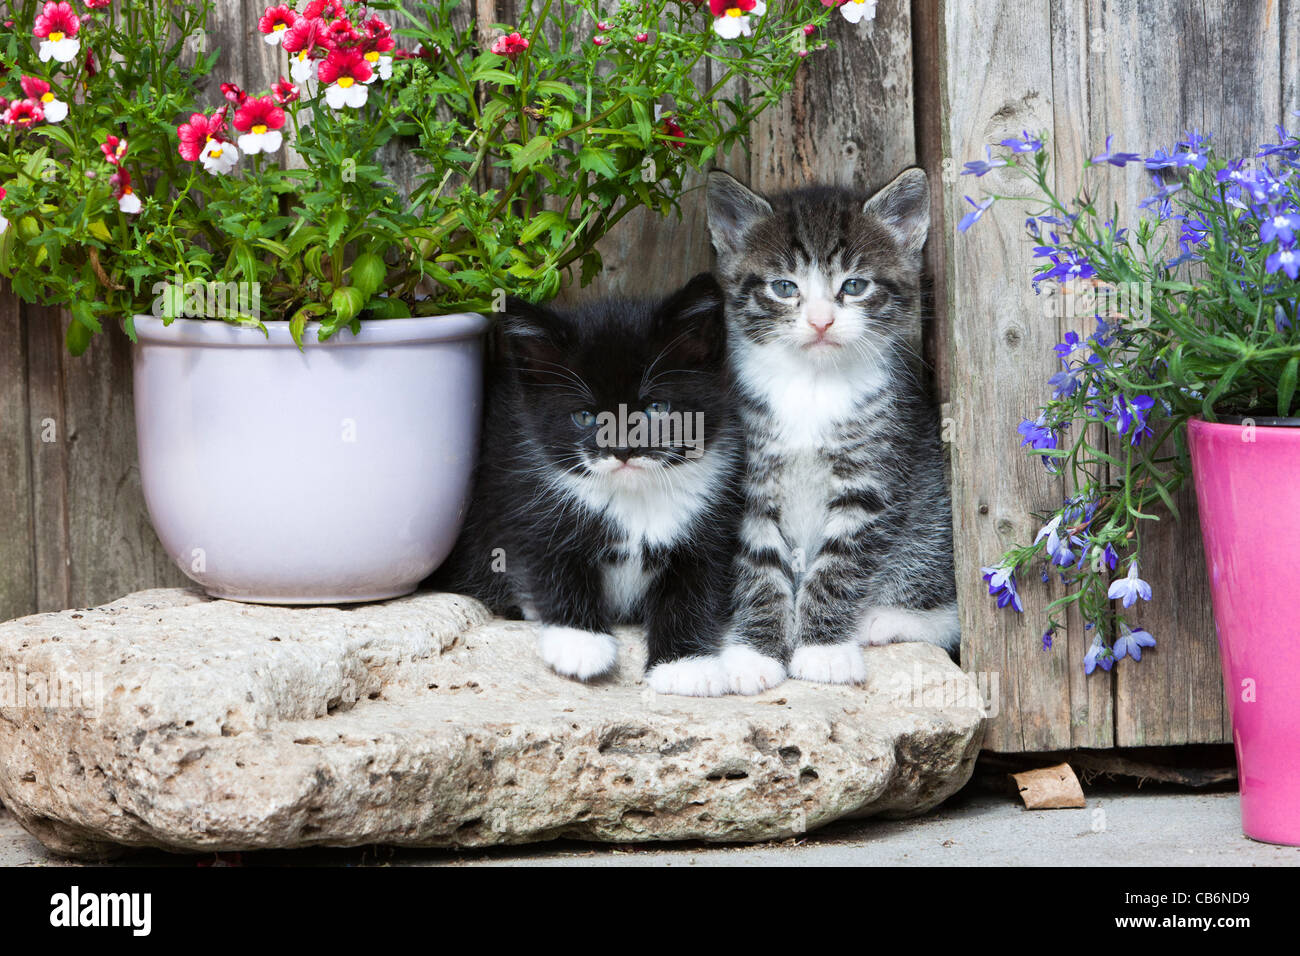 Kittens, two sitting in front of garden shed, Lower Saxony, Germany Stock Photo